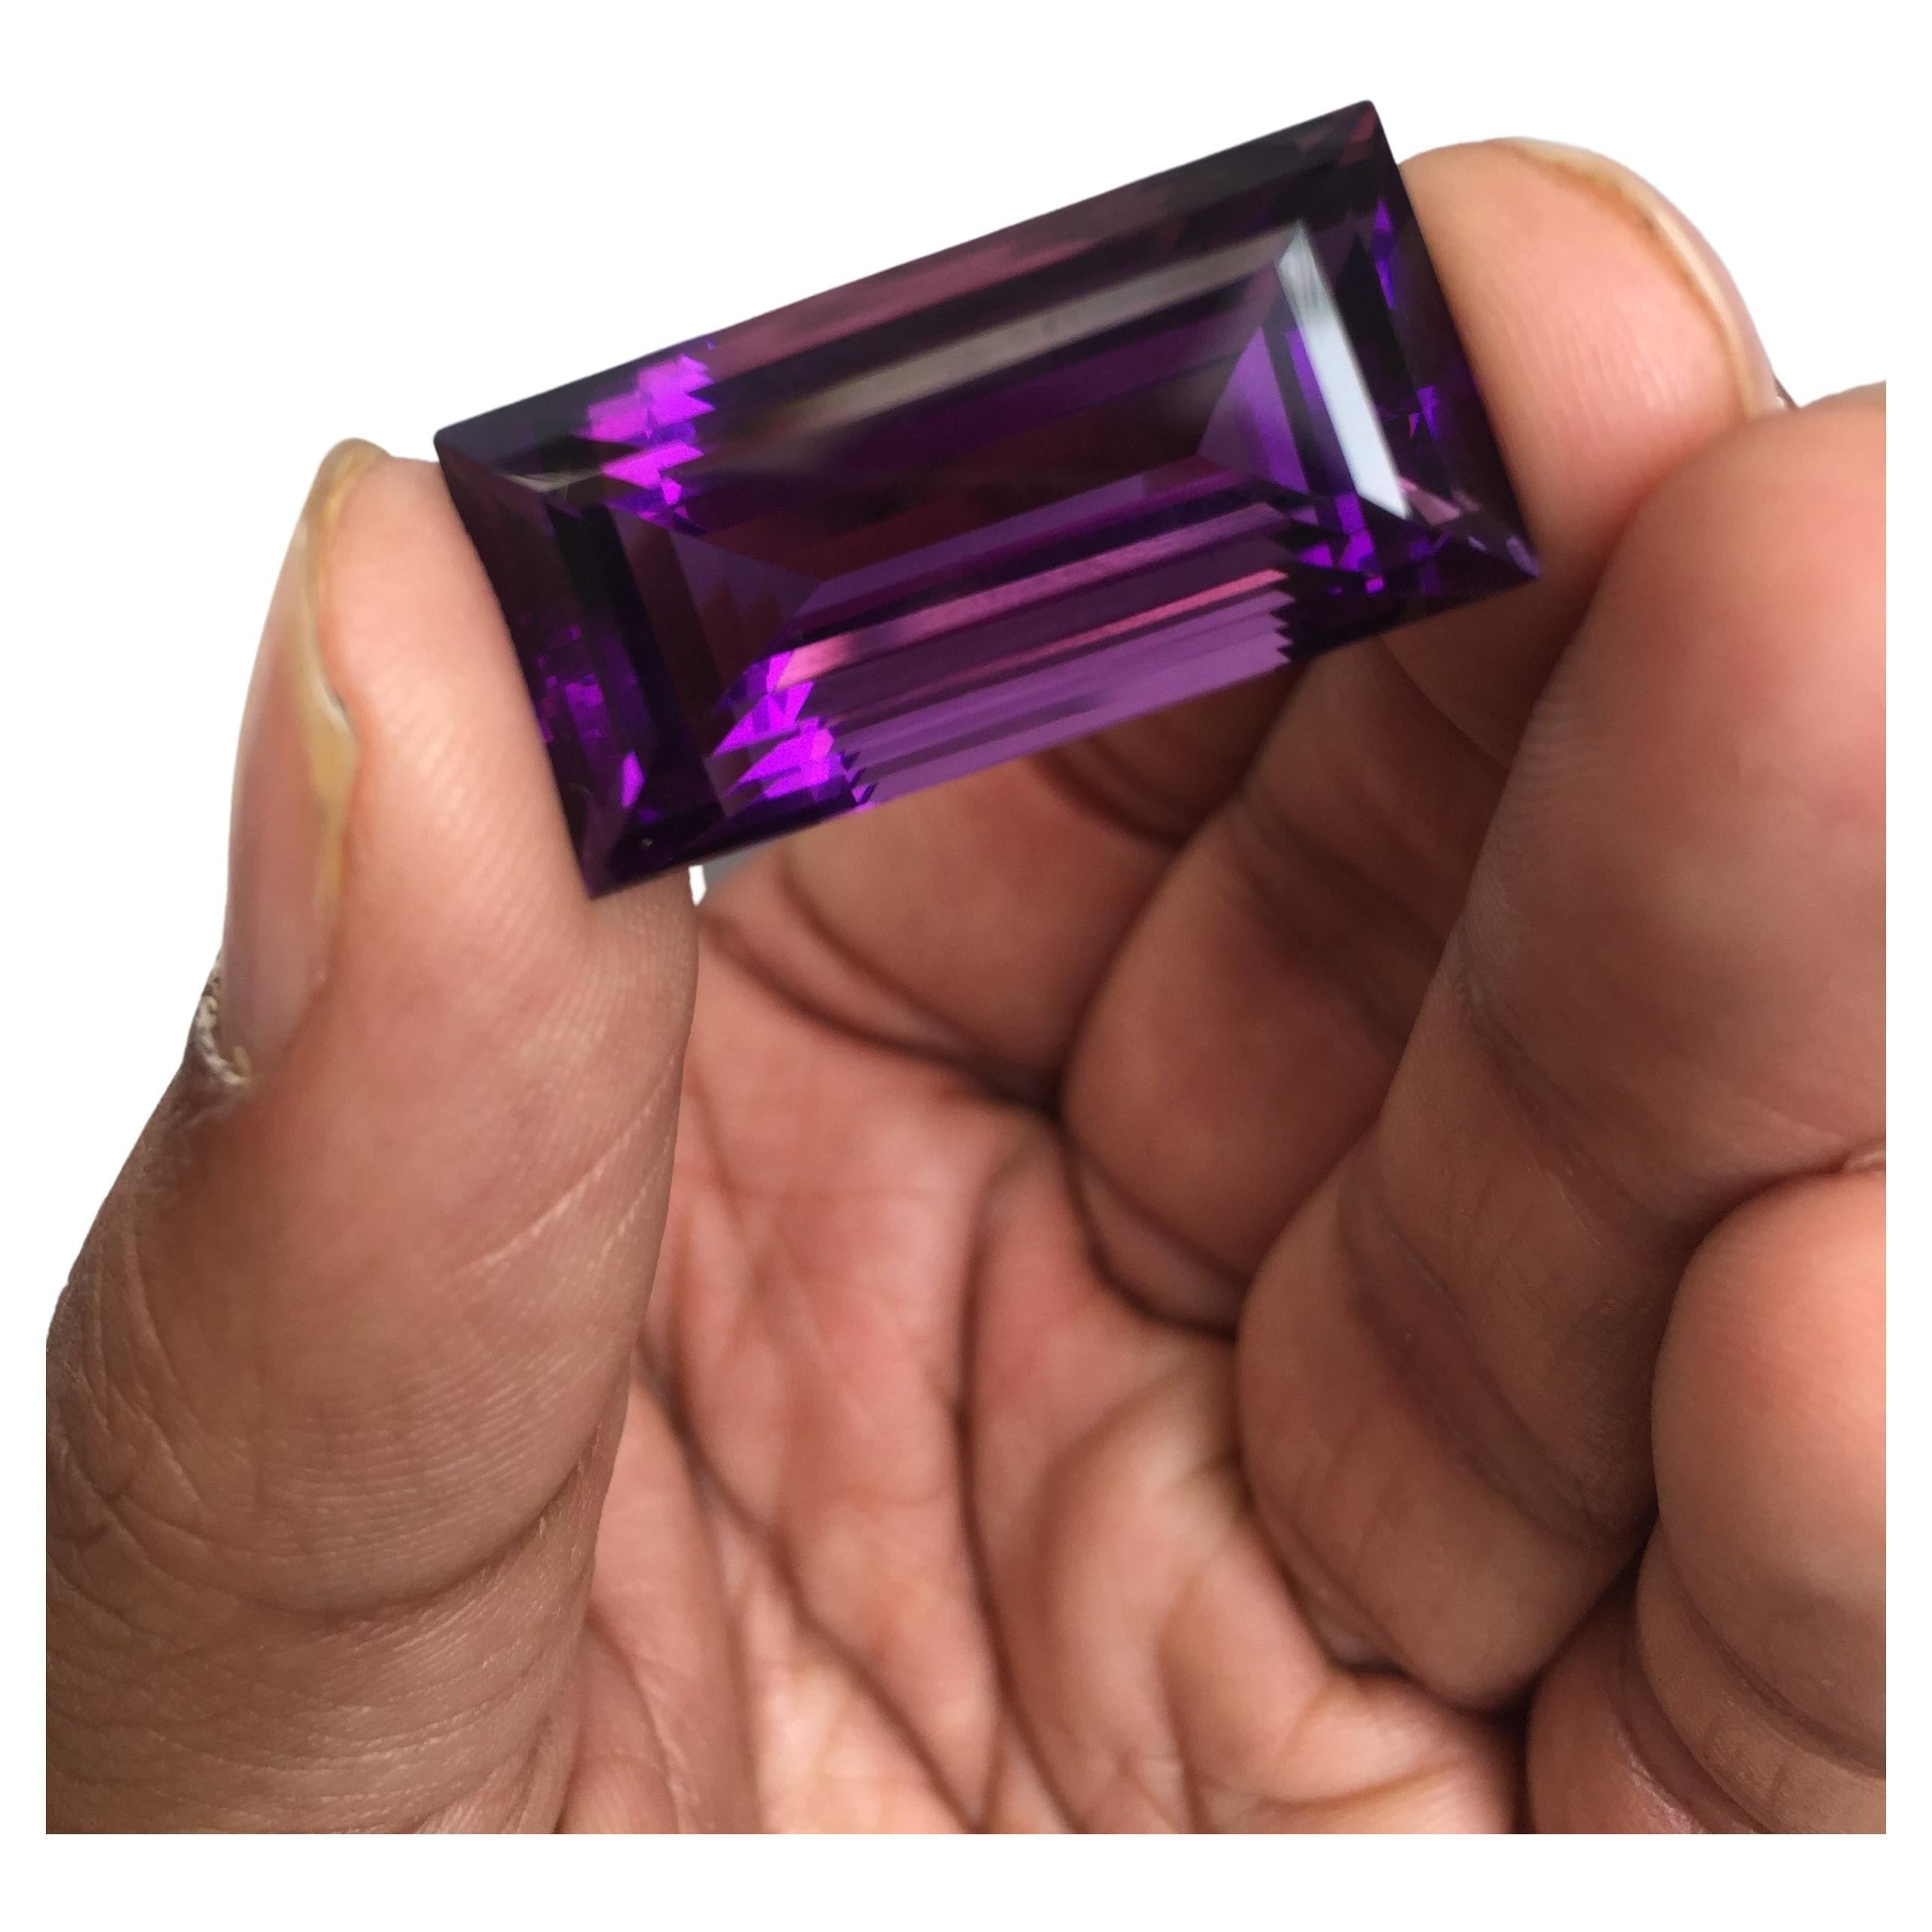 This stunning high-quality amethyst, which is a beautiful violet variety of quartz. The baguette shape of the gemstone adds a touch of sophistication and class, making it perfect for those looking for a statement piece. The natural beauty of the